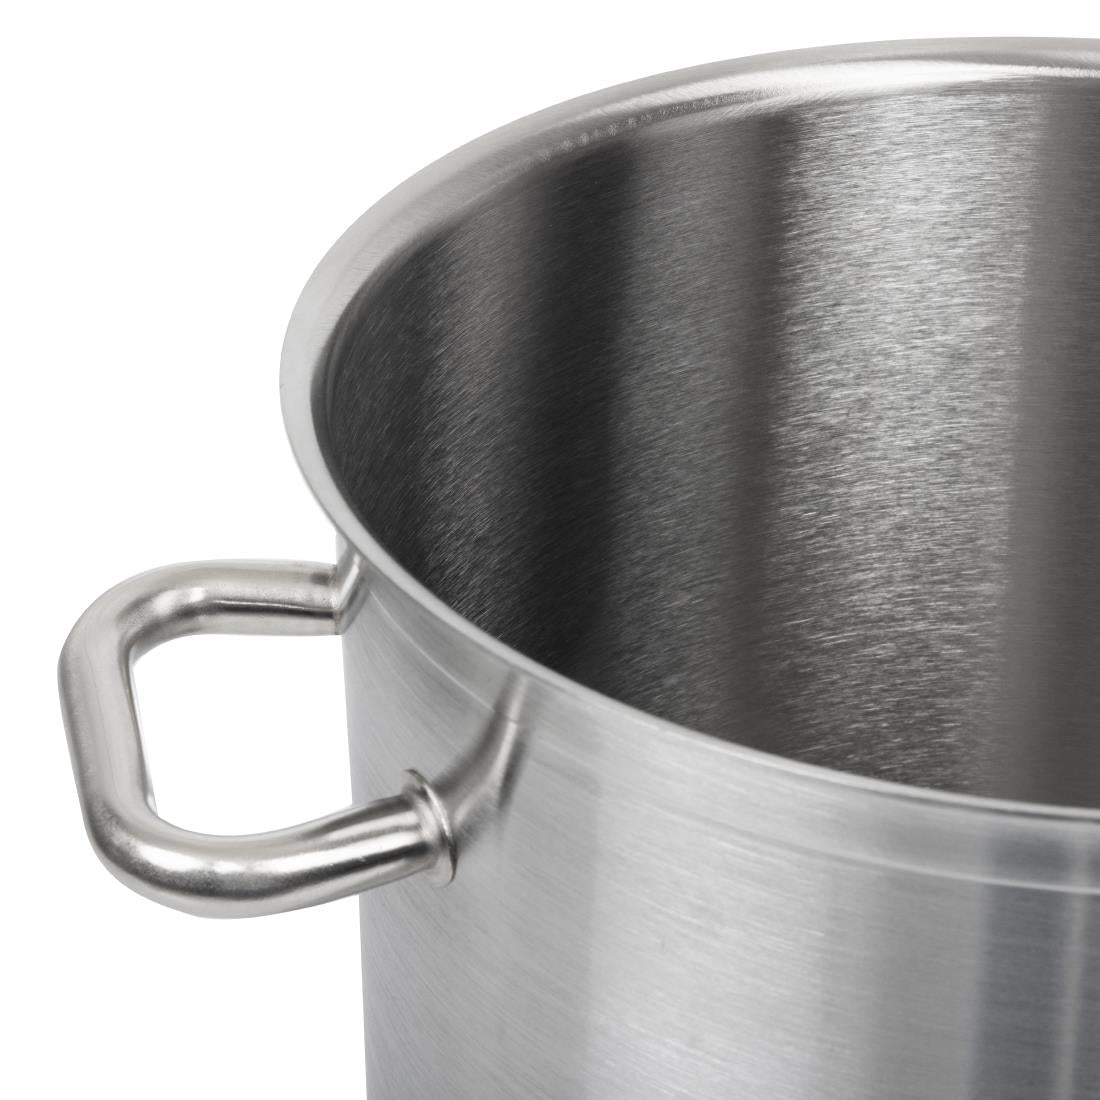 Bourgeat Excellence Stock Pot 10.8Ltr JD Catering Equipment Solutions Ltd